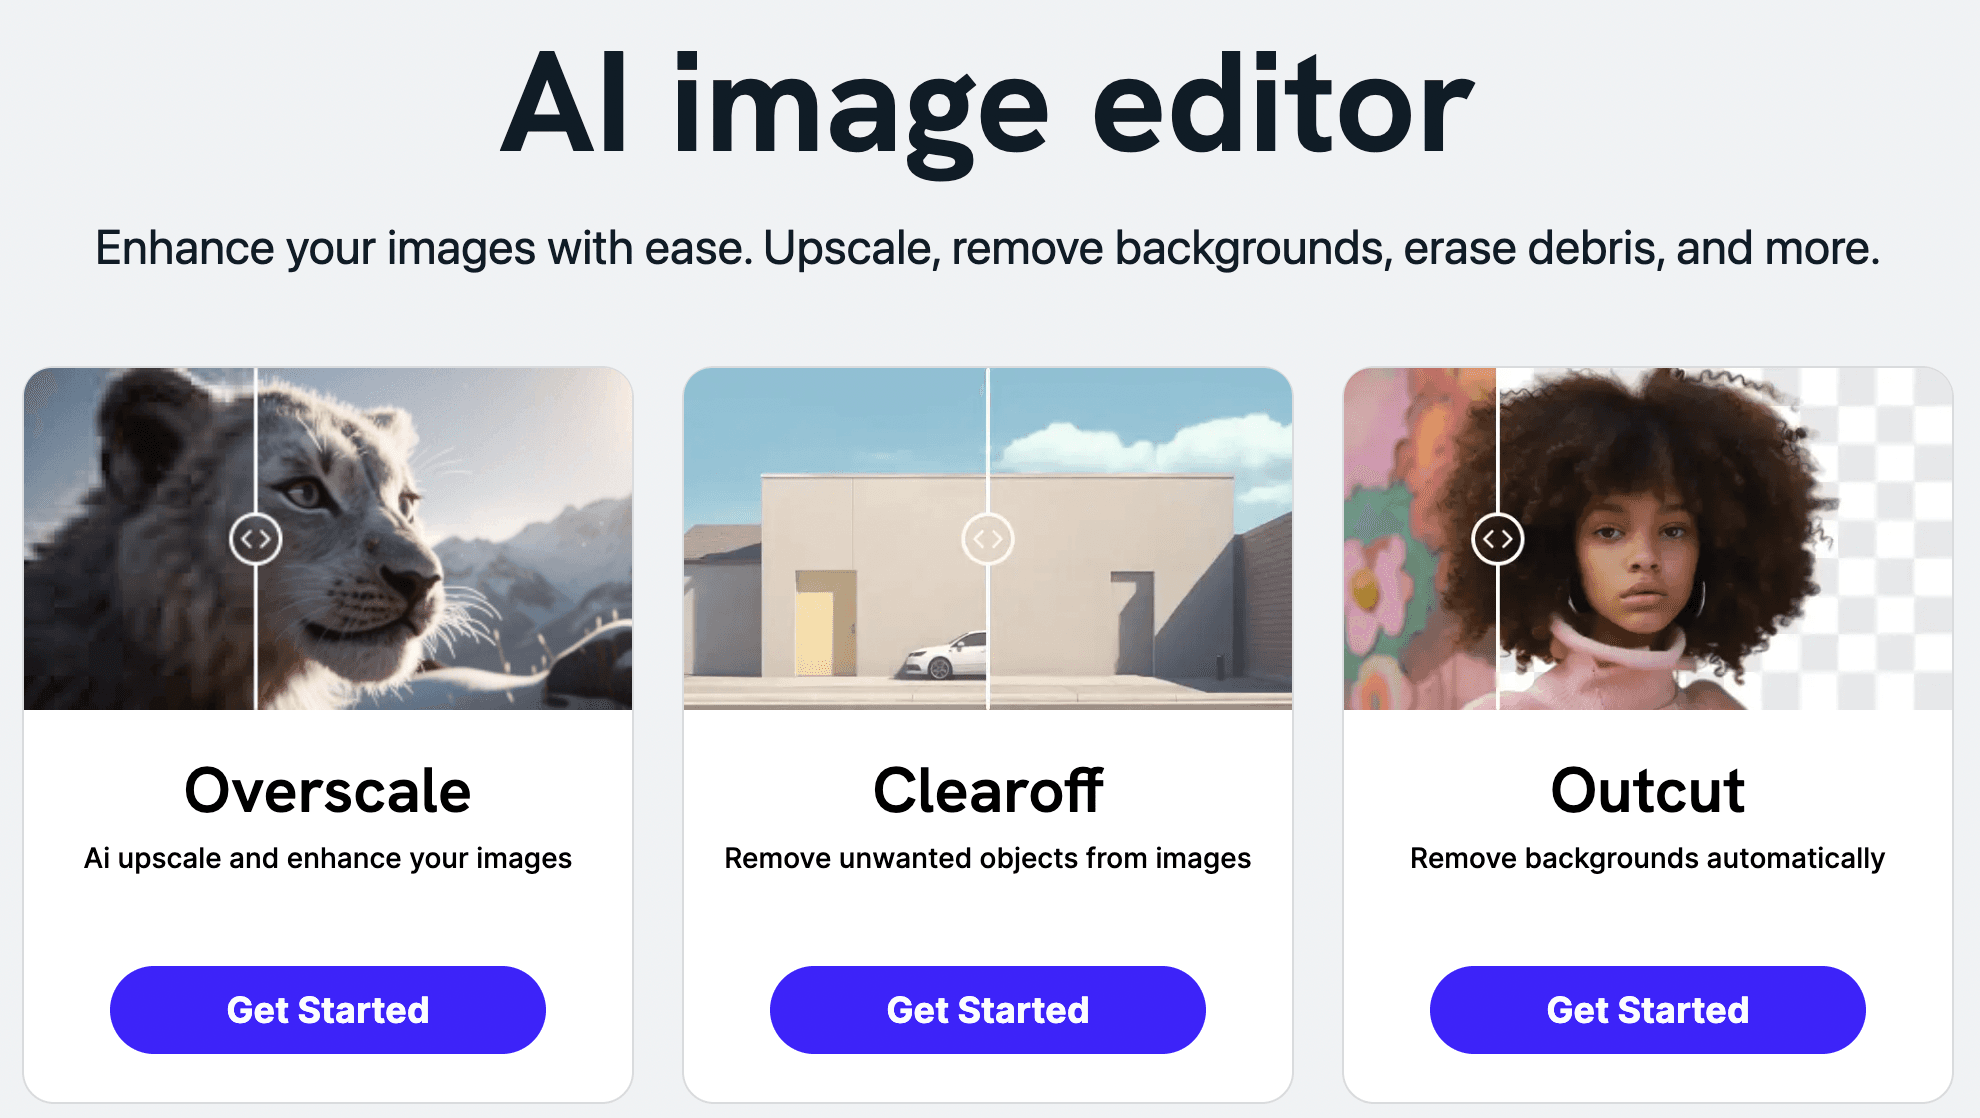 AI Image Editor - Advanced Enhancement Tools for Upscaling, Object Removal, and Background Erasing